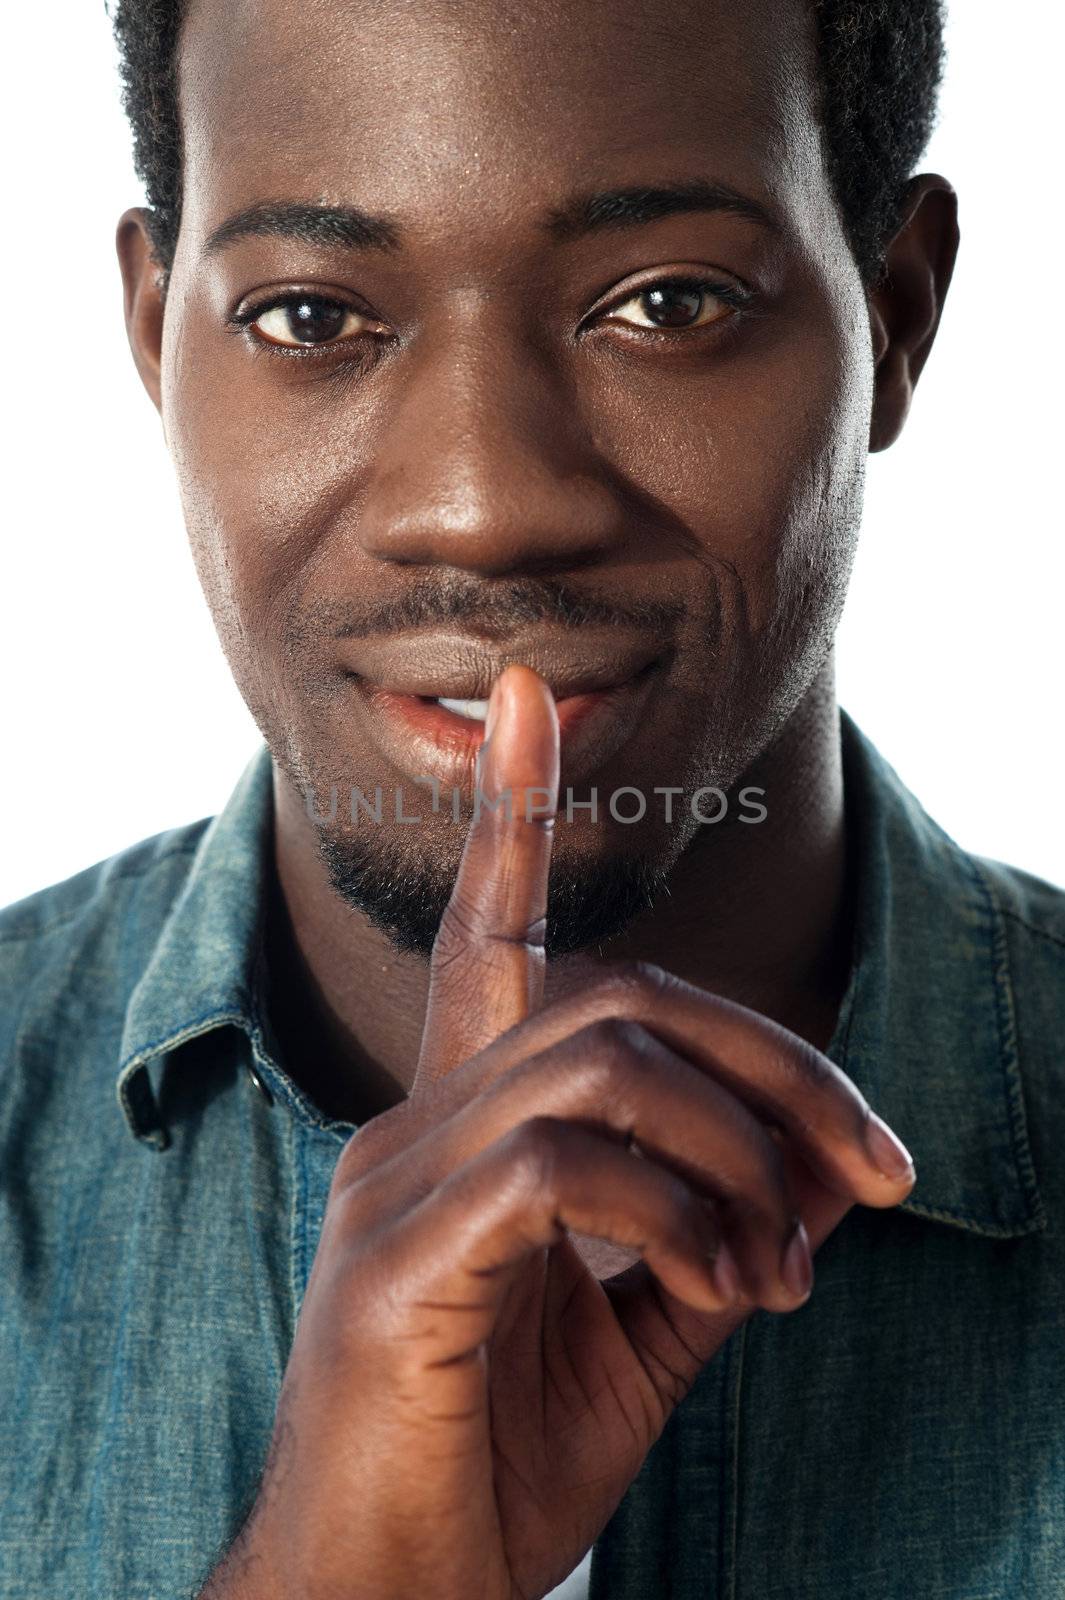 Silence gesture by a young guy against white background. Closeup view